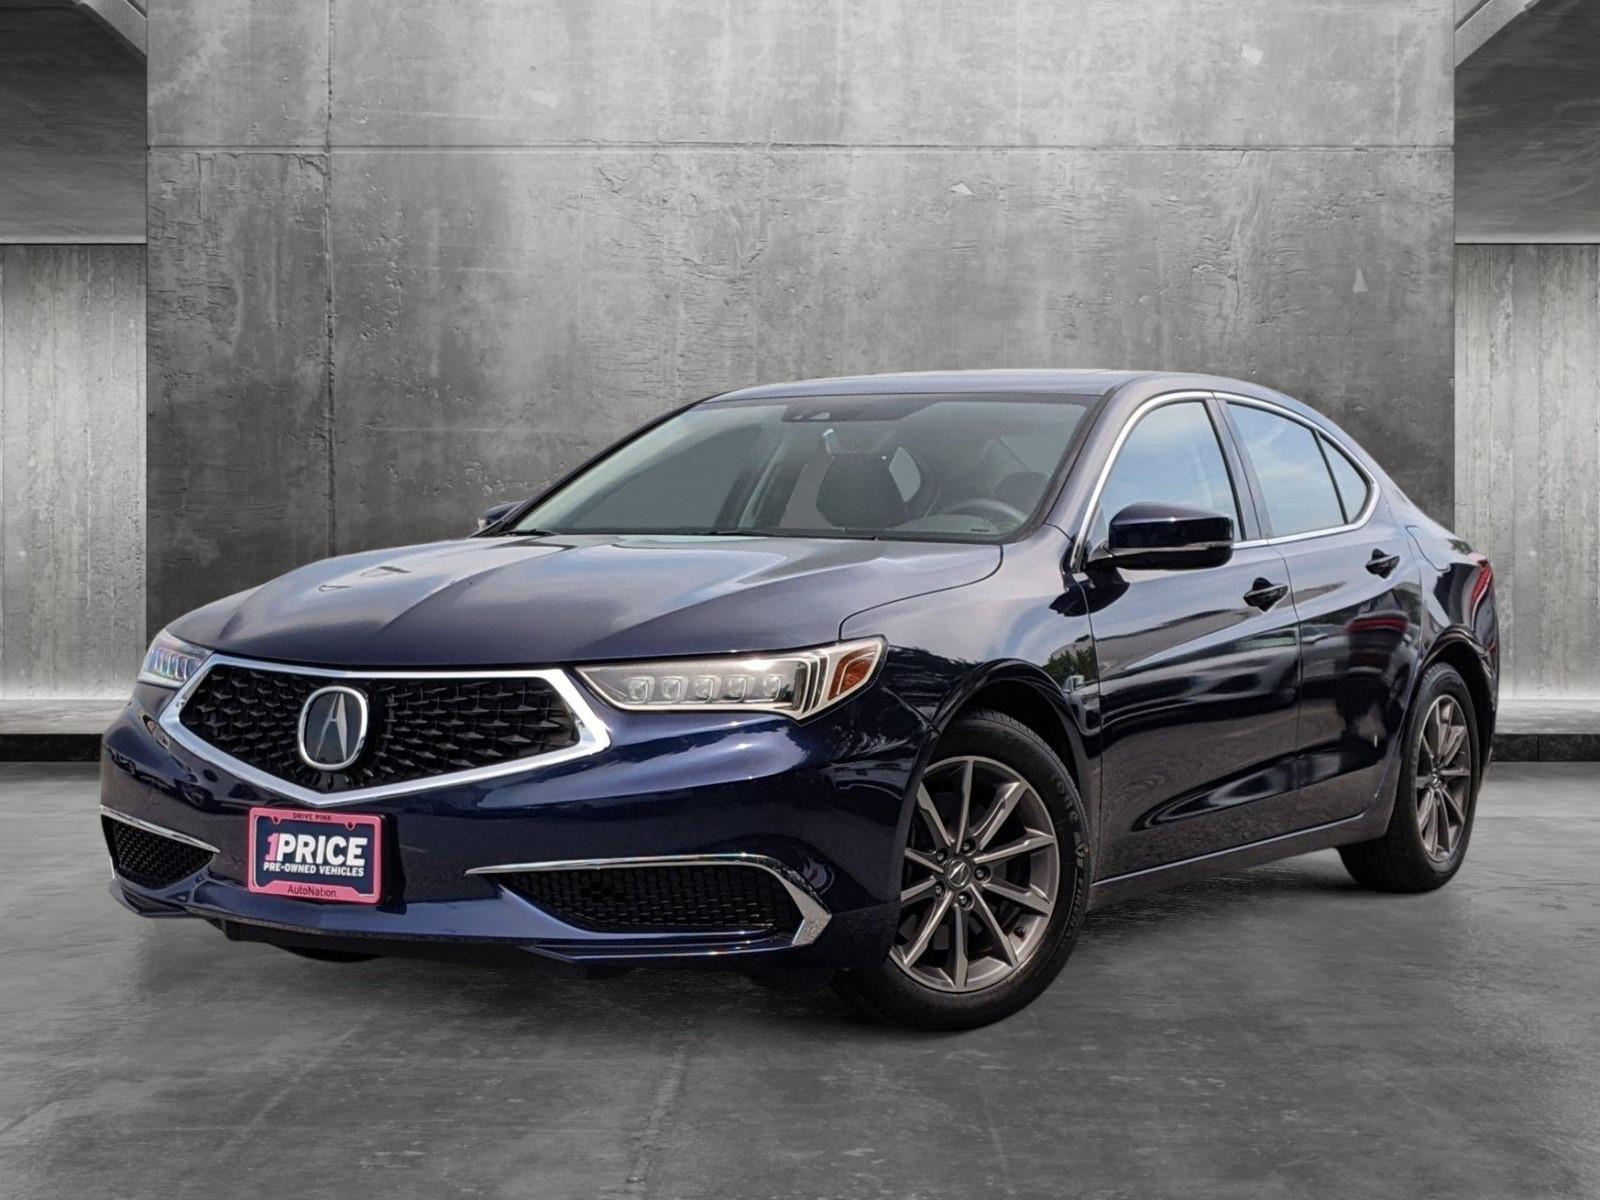 2020 Acura TLX Vehicle Photo in Bel Air, MD 21014